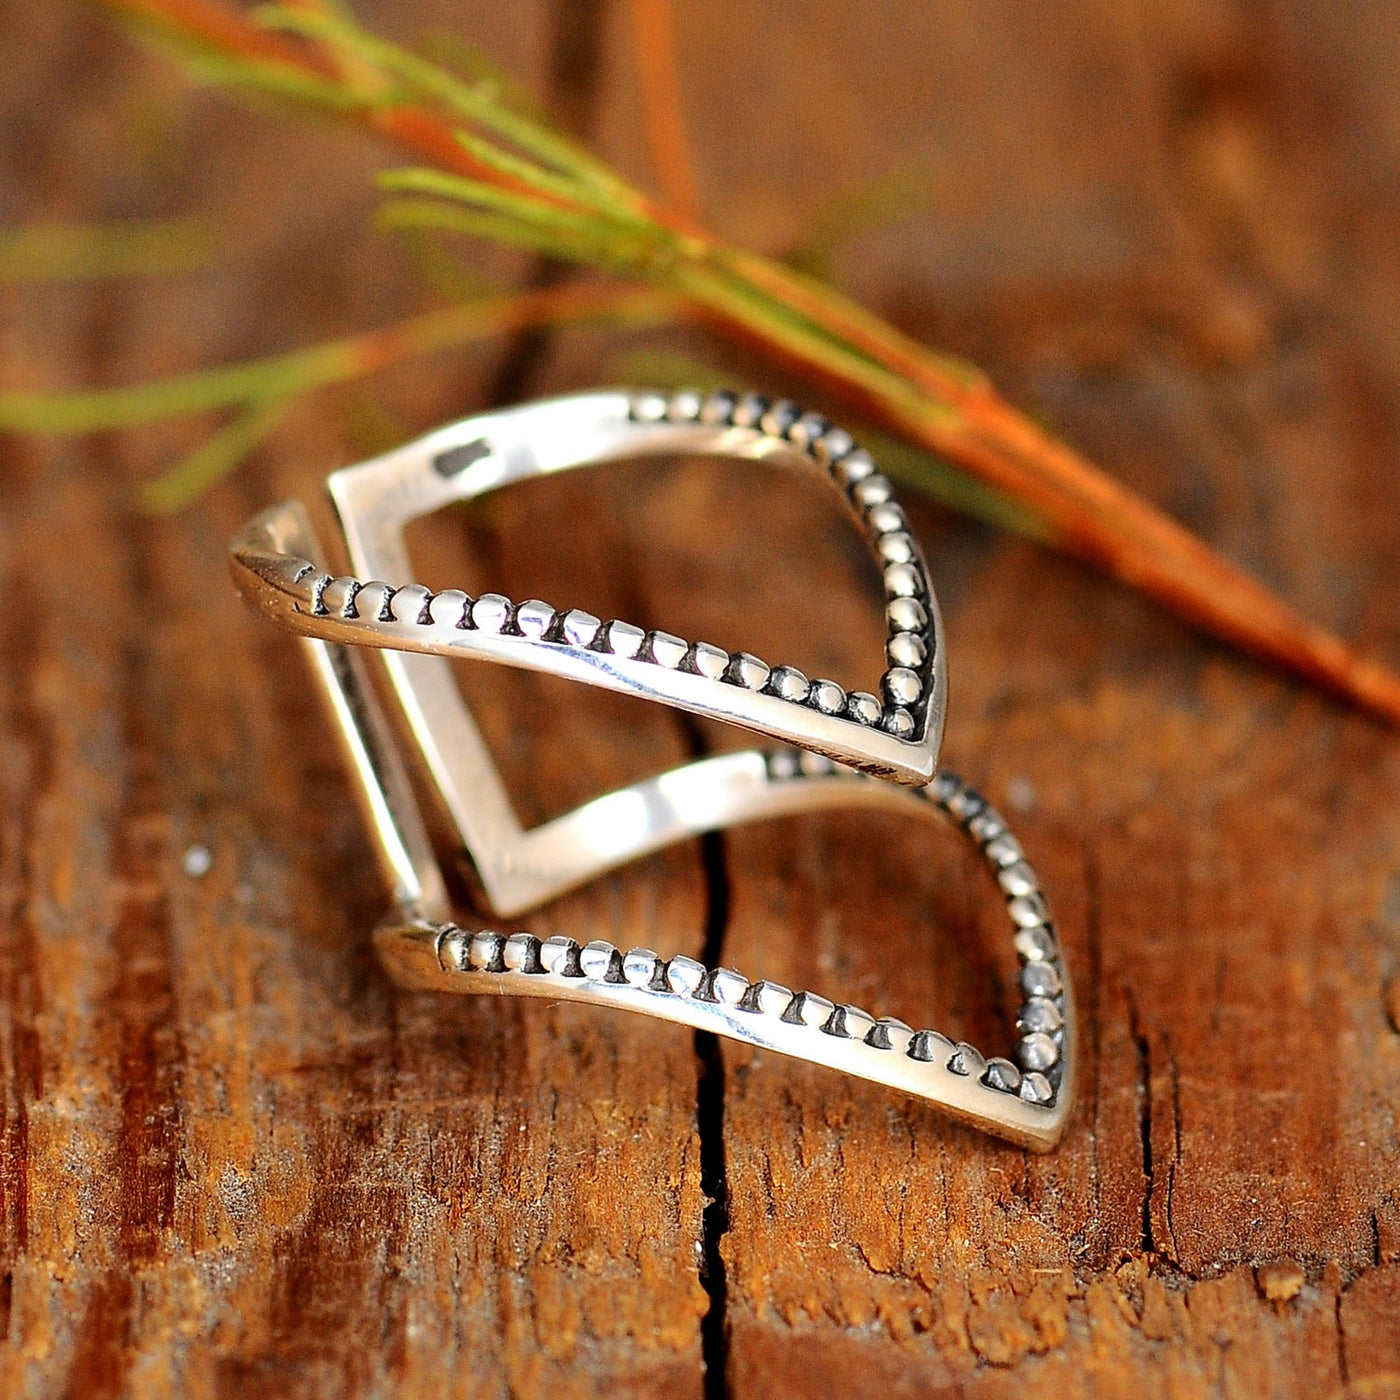 Double Chevron Statement Sterling Silver ring